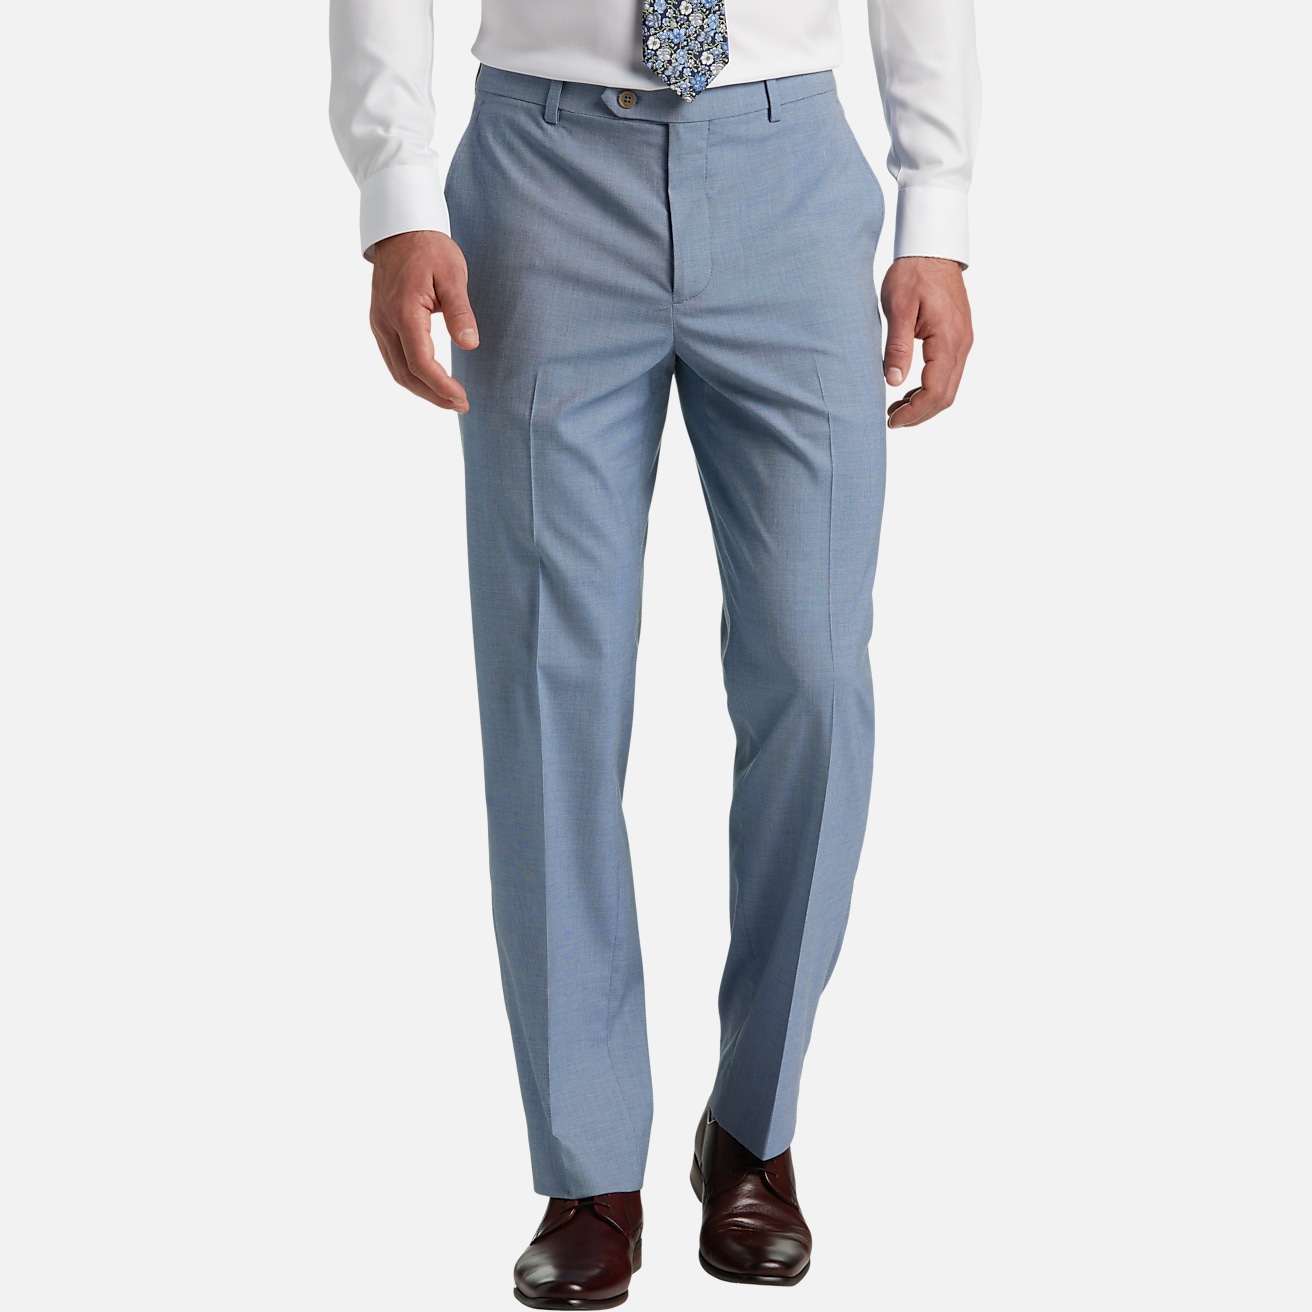 https://image.menswearhouse.com/is/image/TMW/TMW_3XP6_70_PRONTO_UOMO_SUIT_SEPARATE_PANTS_BLUE_TIC_MAIN?imPolicy=pdp-mob-2x